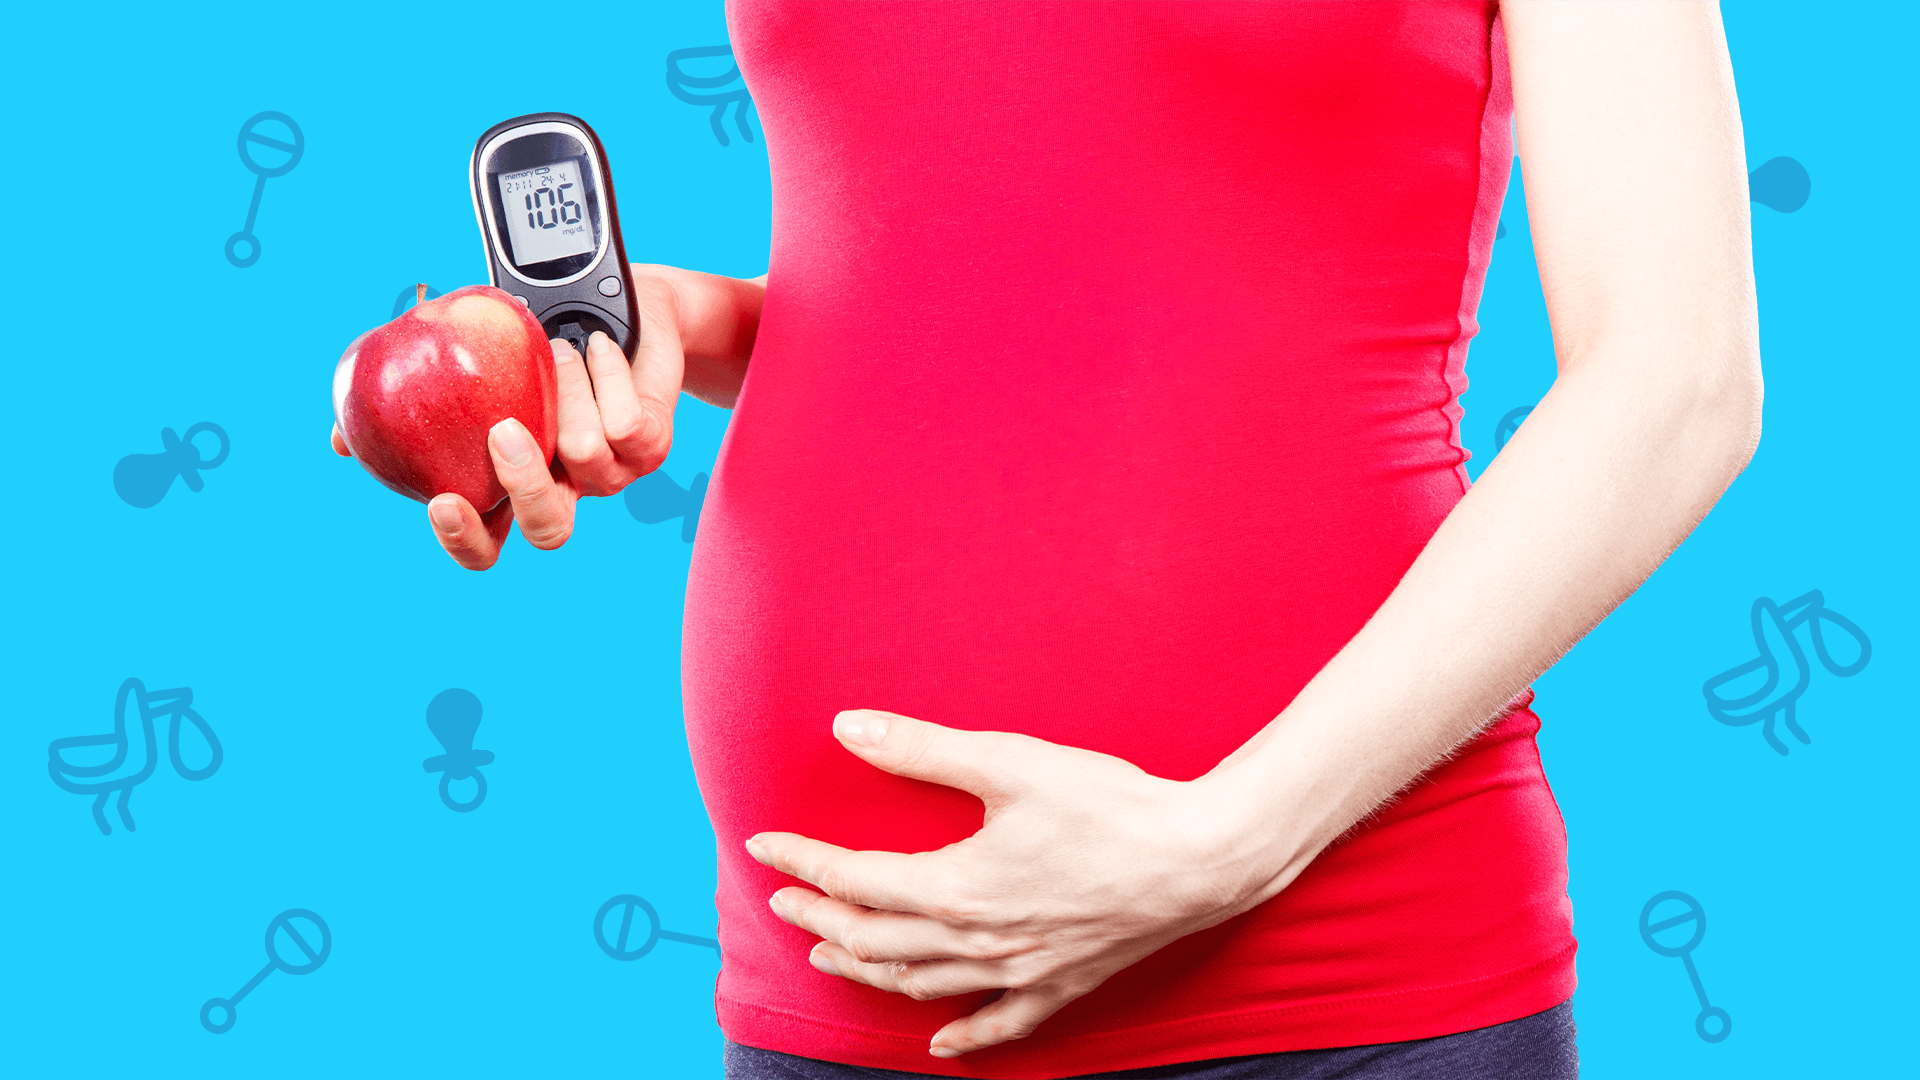 What to know about gestational diabetes